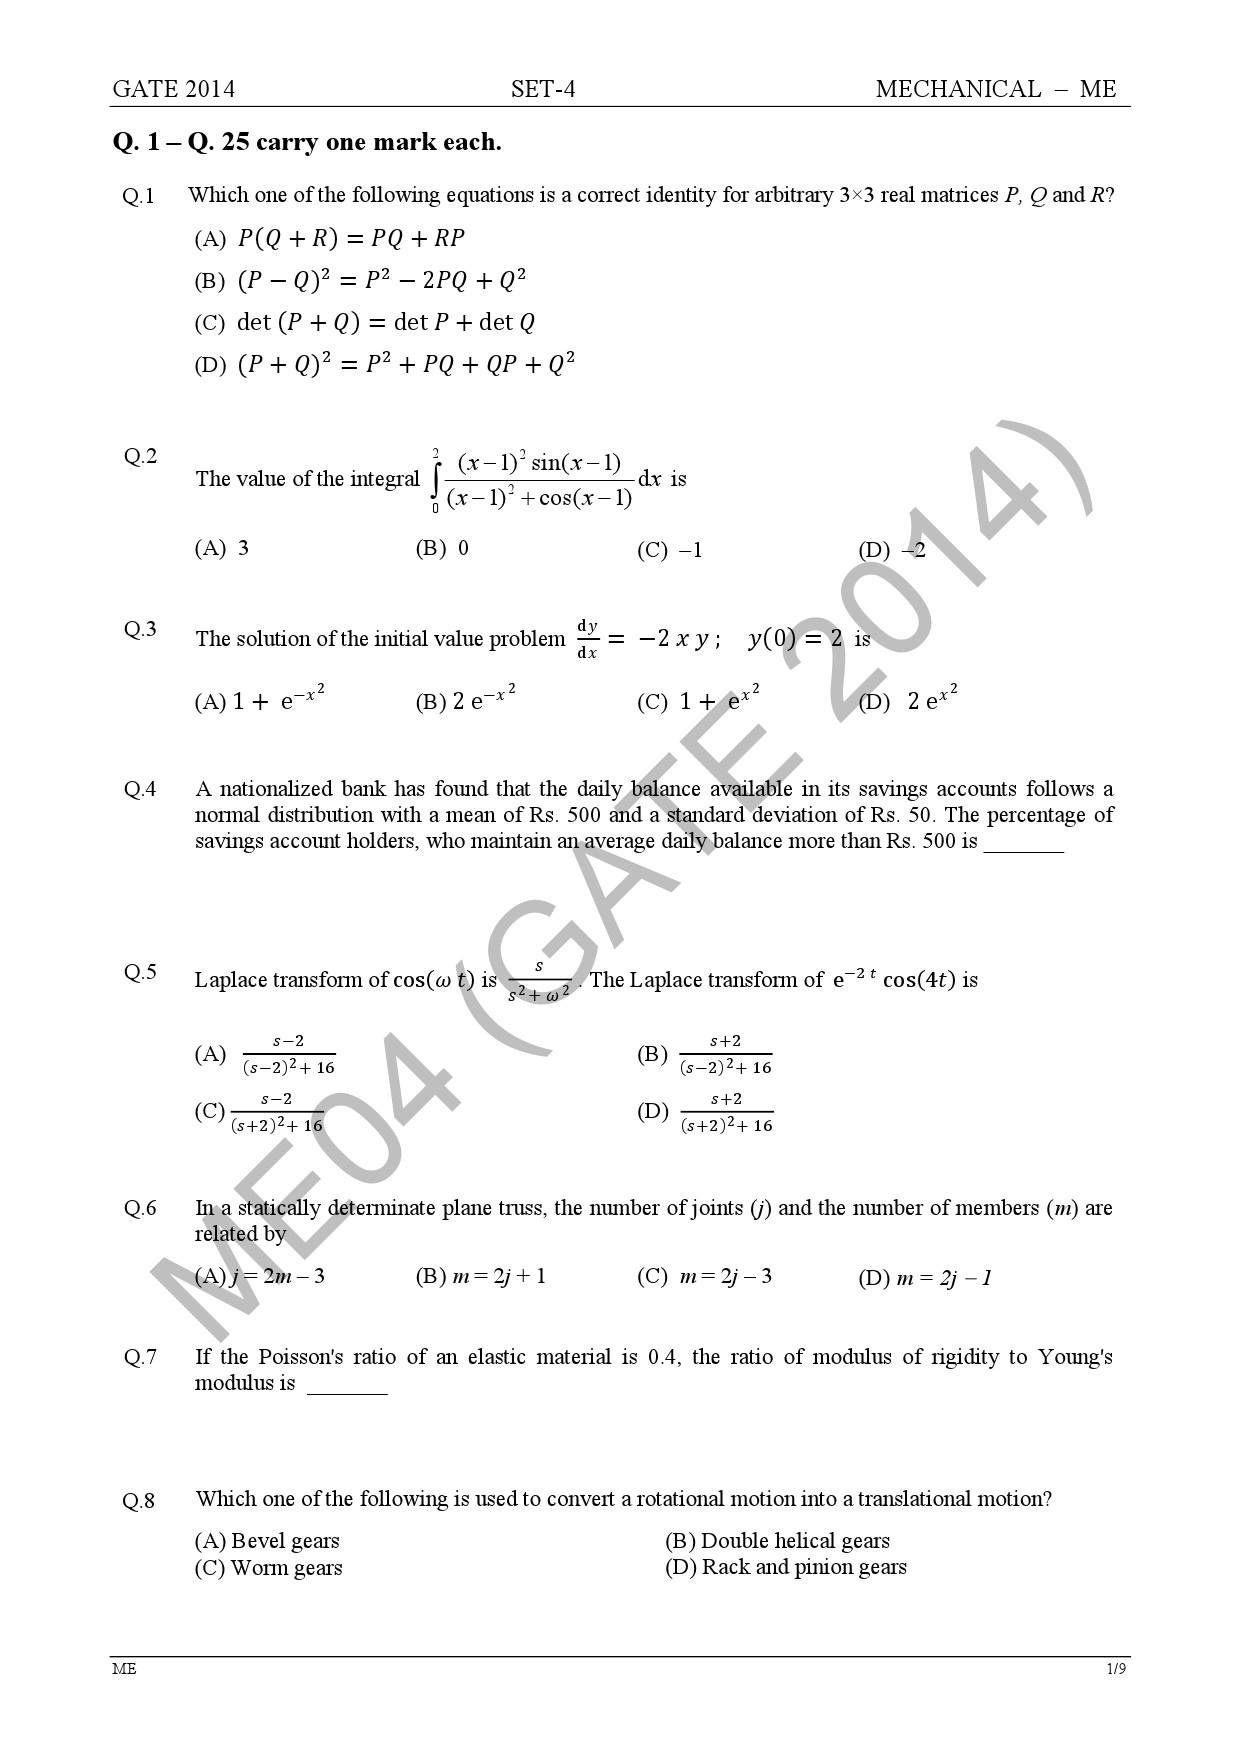 GATE Exam Question Paper 2014 Mechanical Engineering Set 4 7